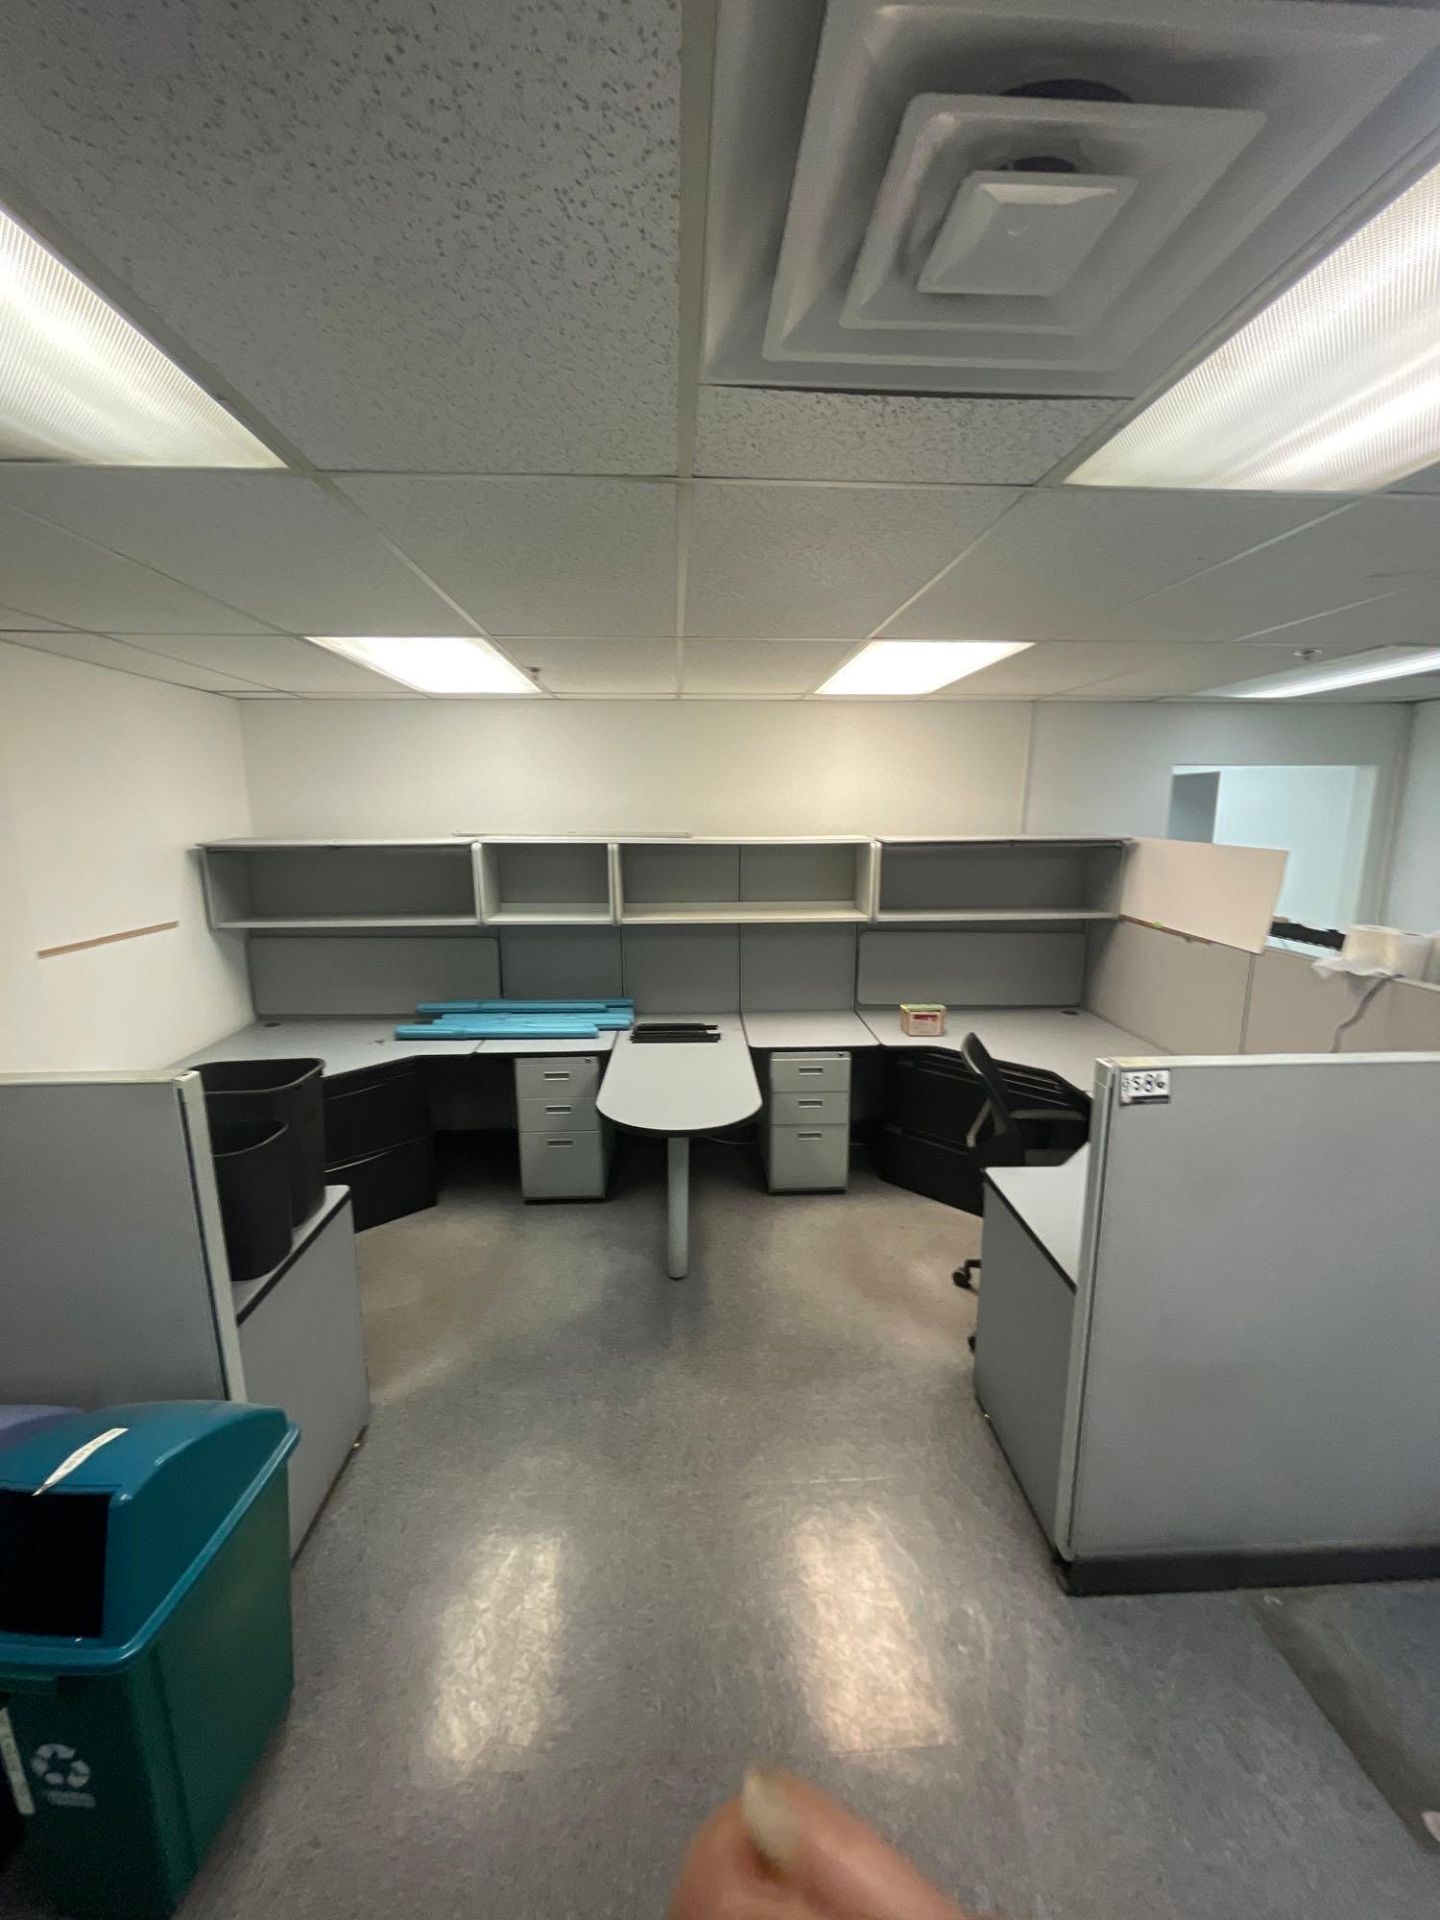 Cubicles - Image 2 of 2